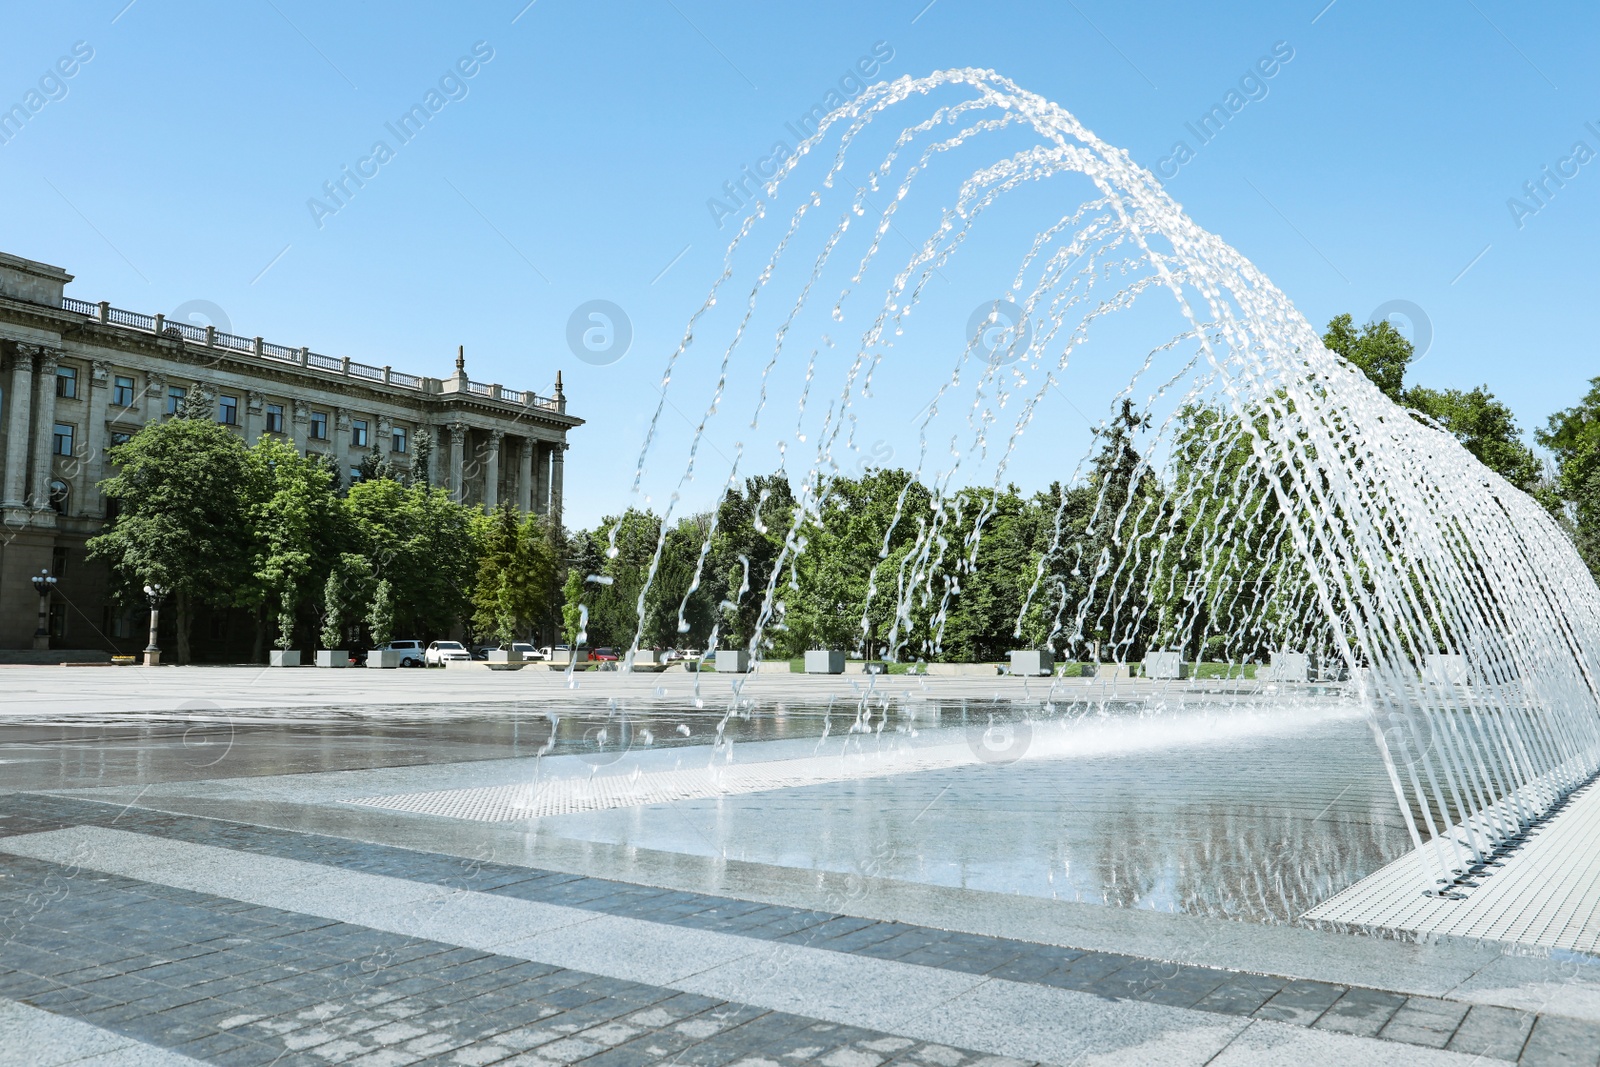 Photo of City square with beautiful fountains on sunny day